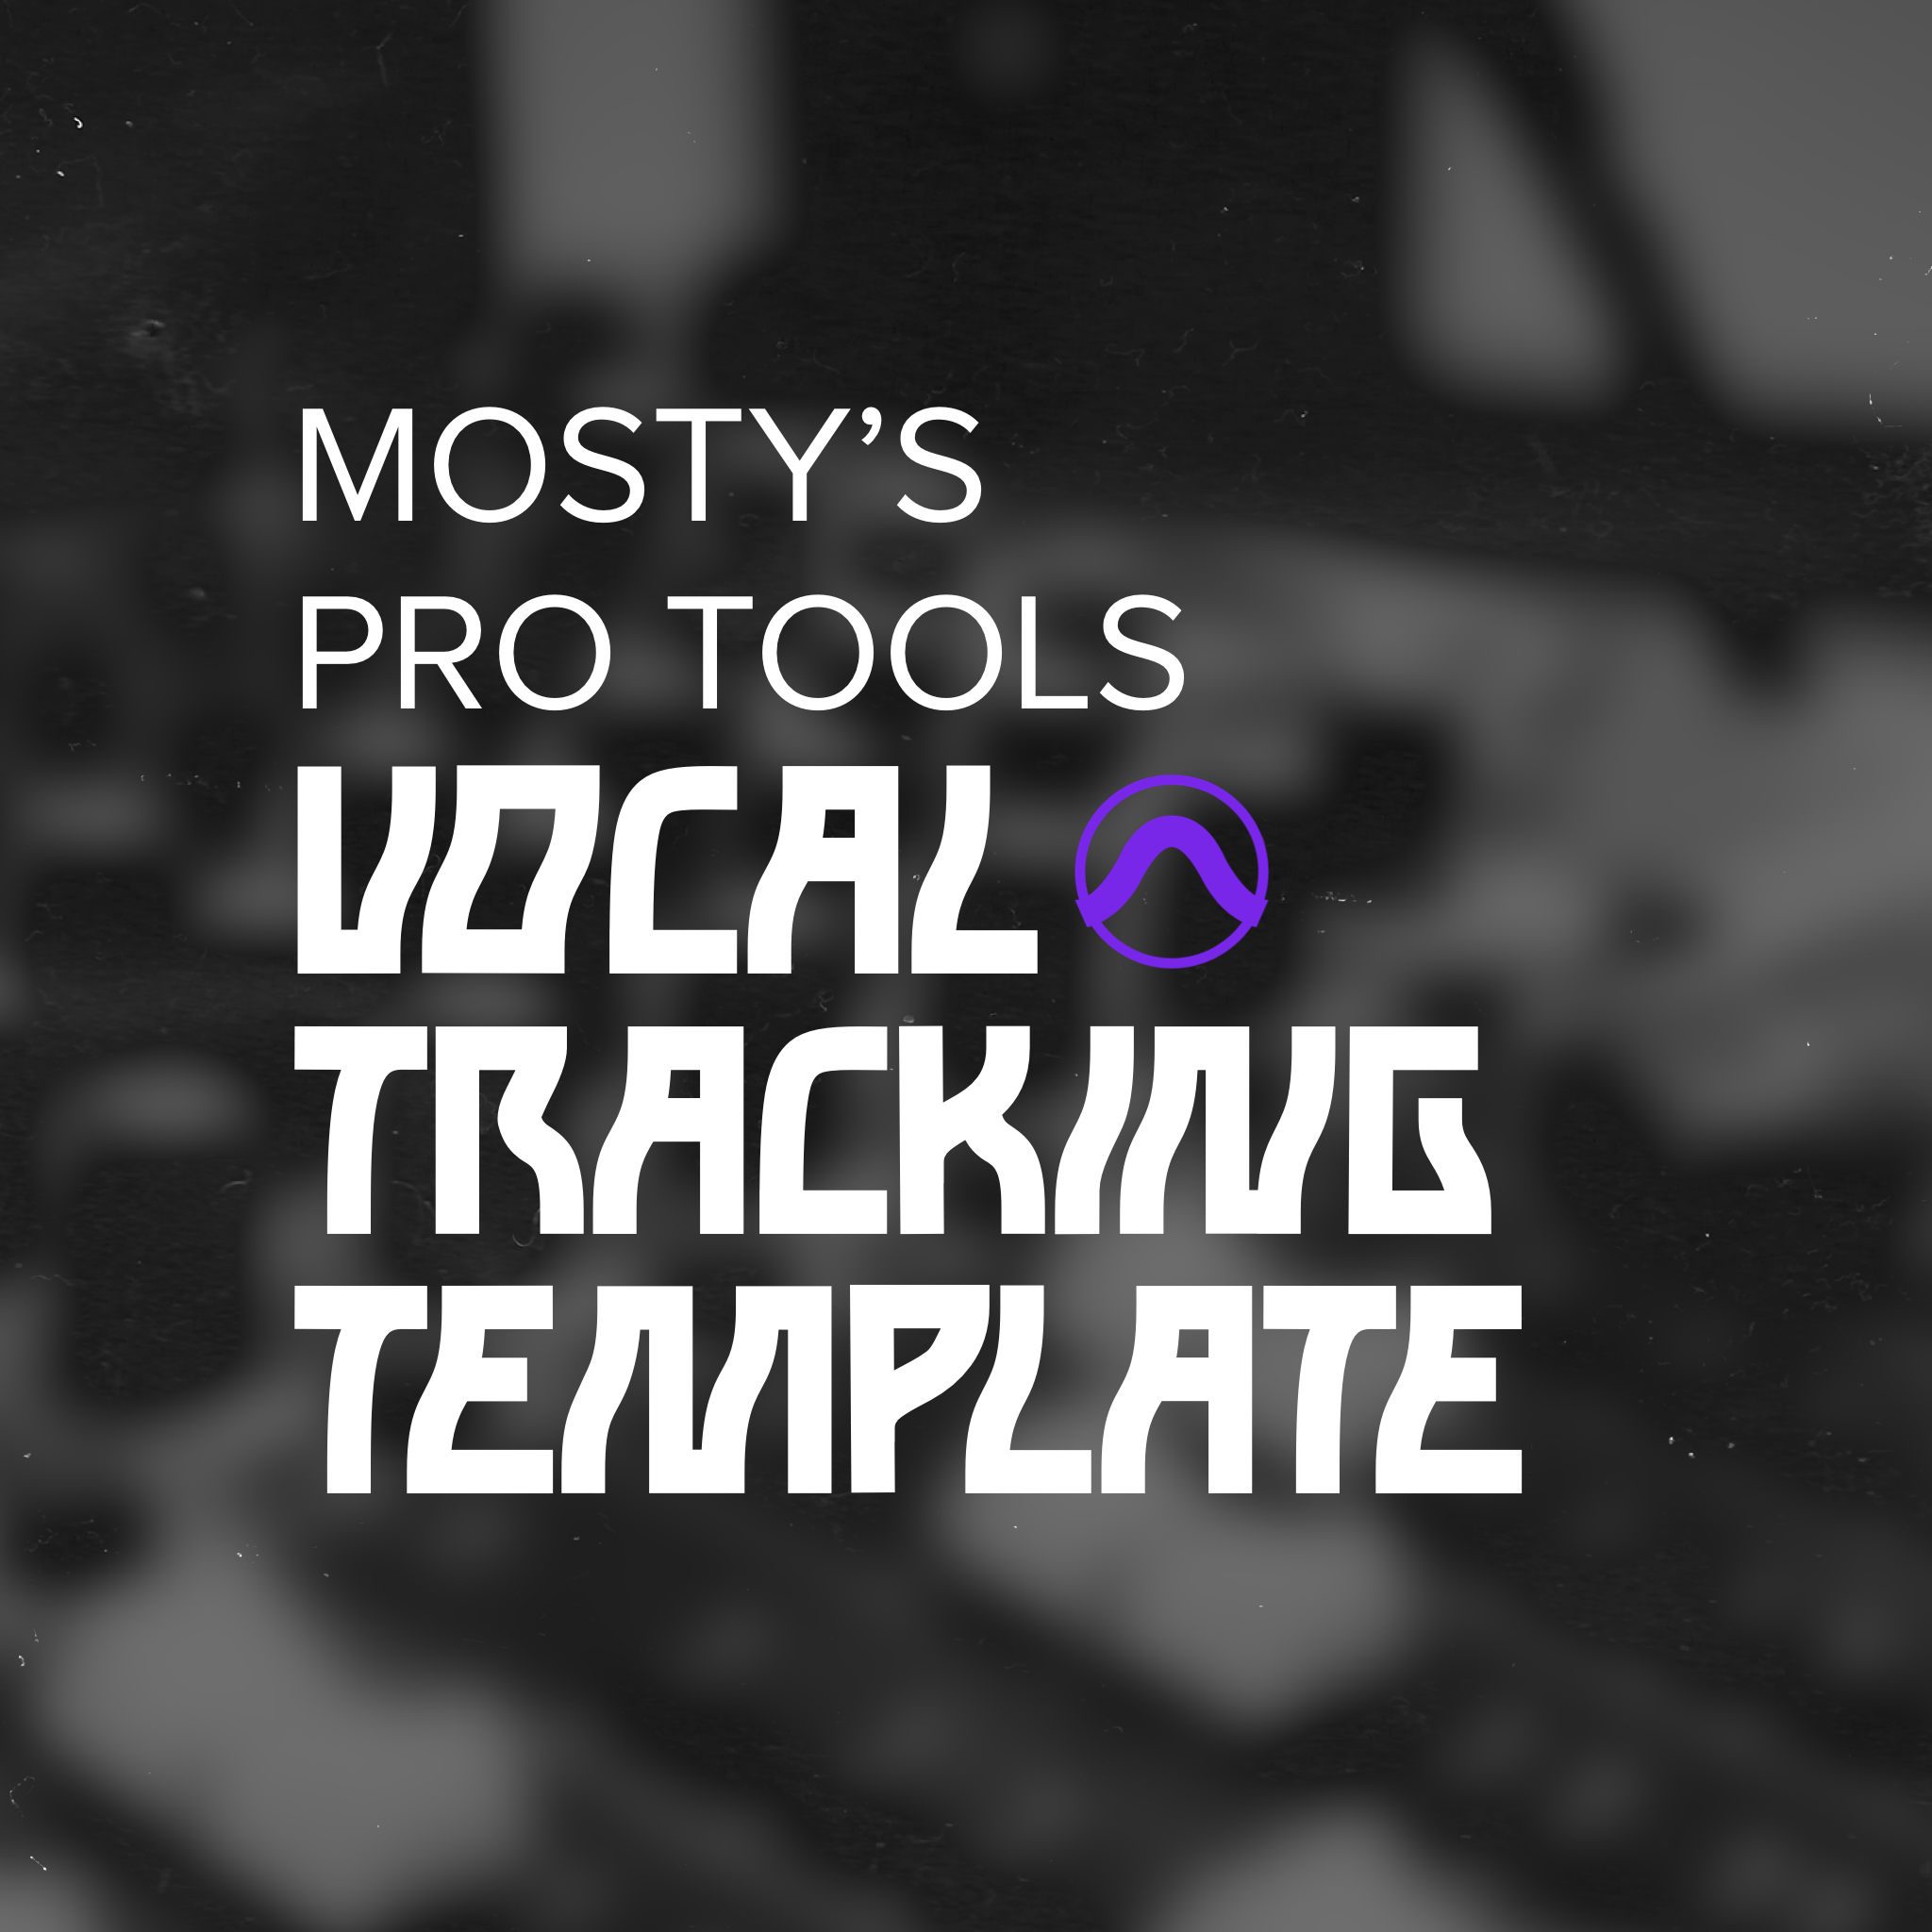 pro-tools-mixing-template-mosty